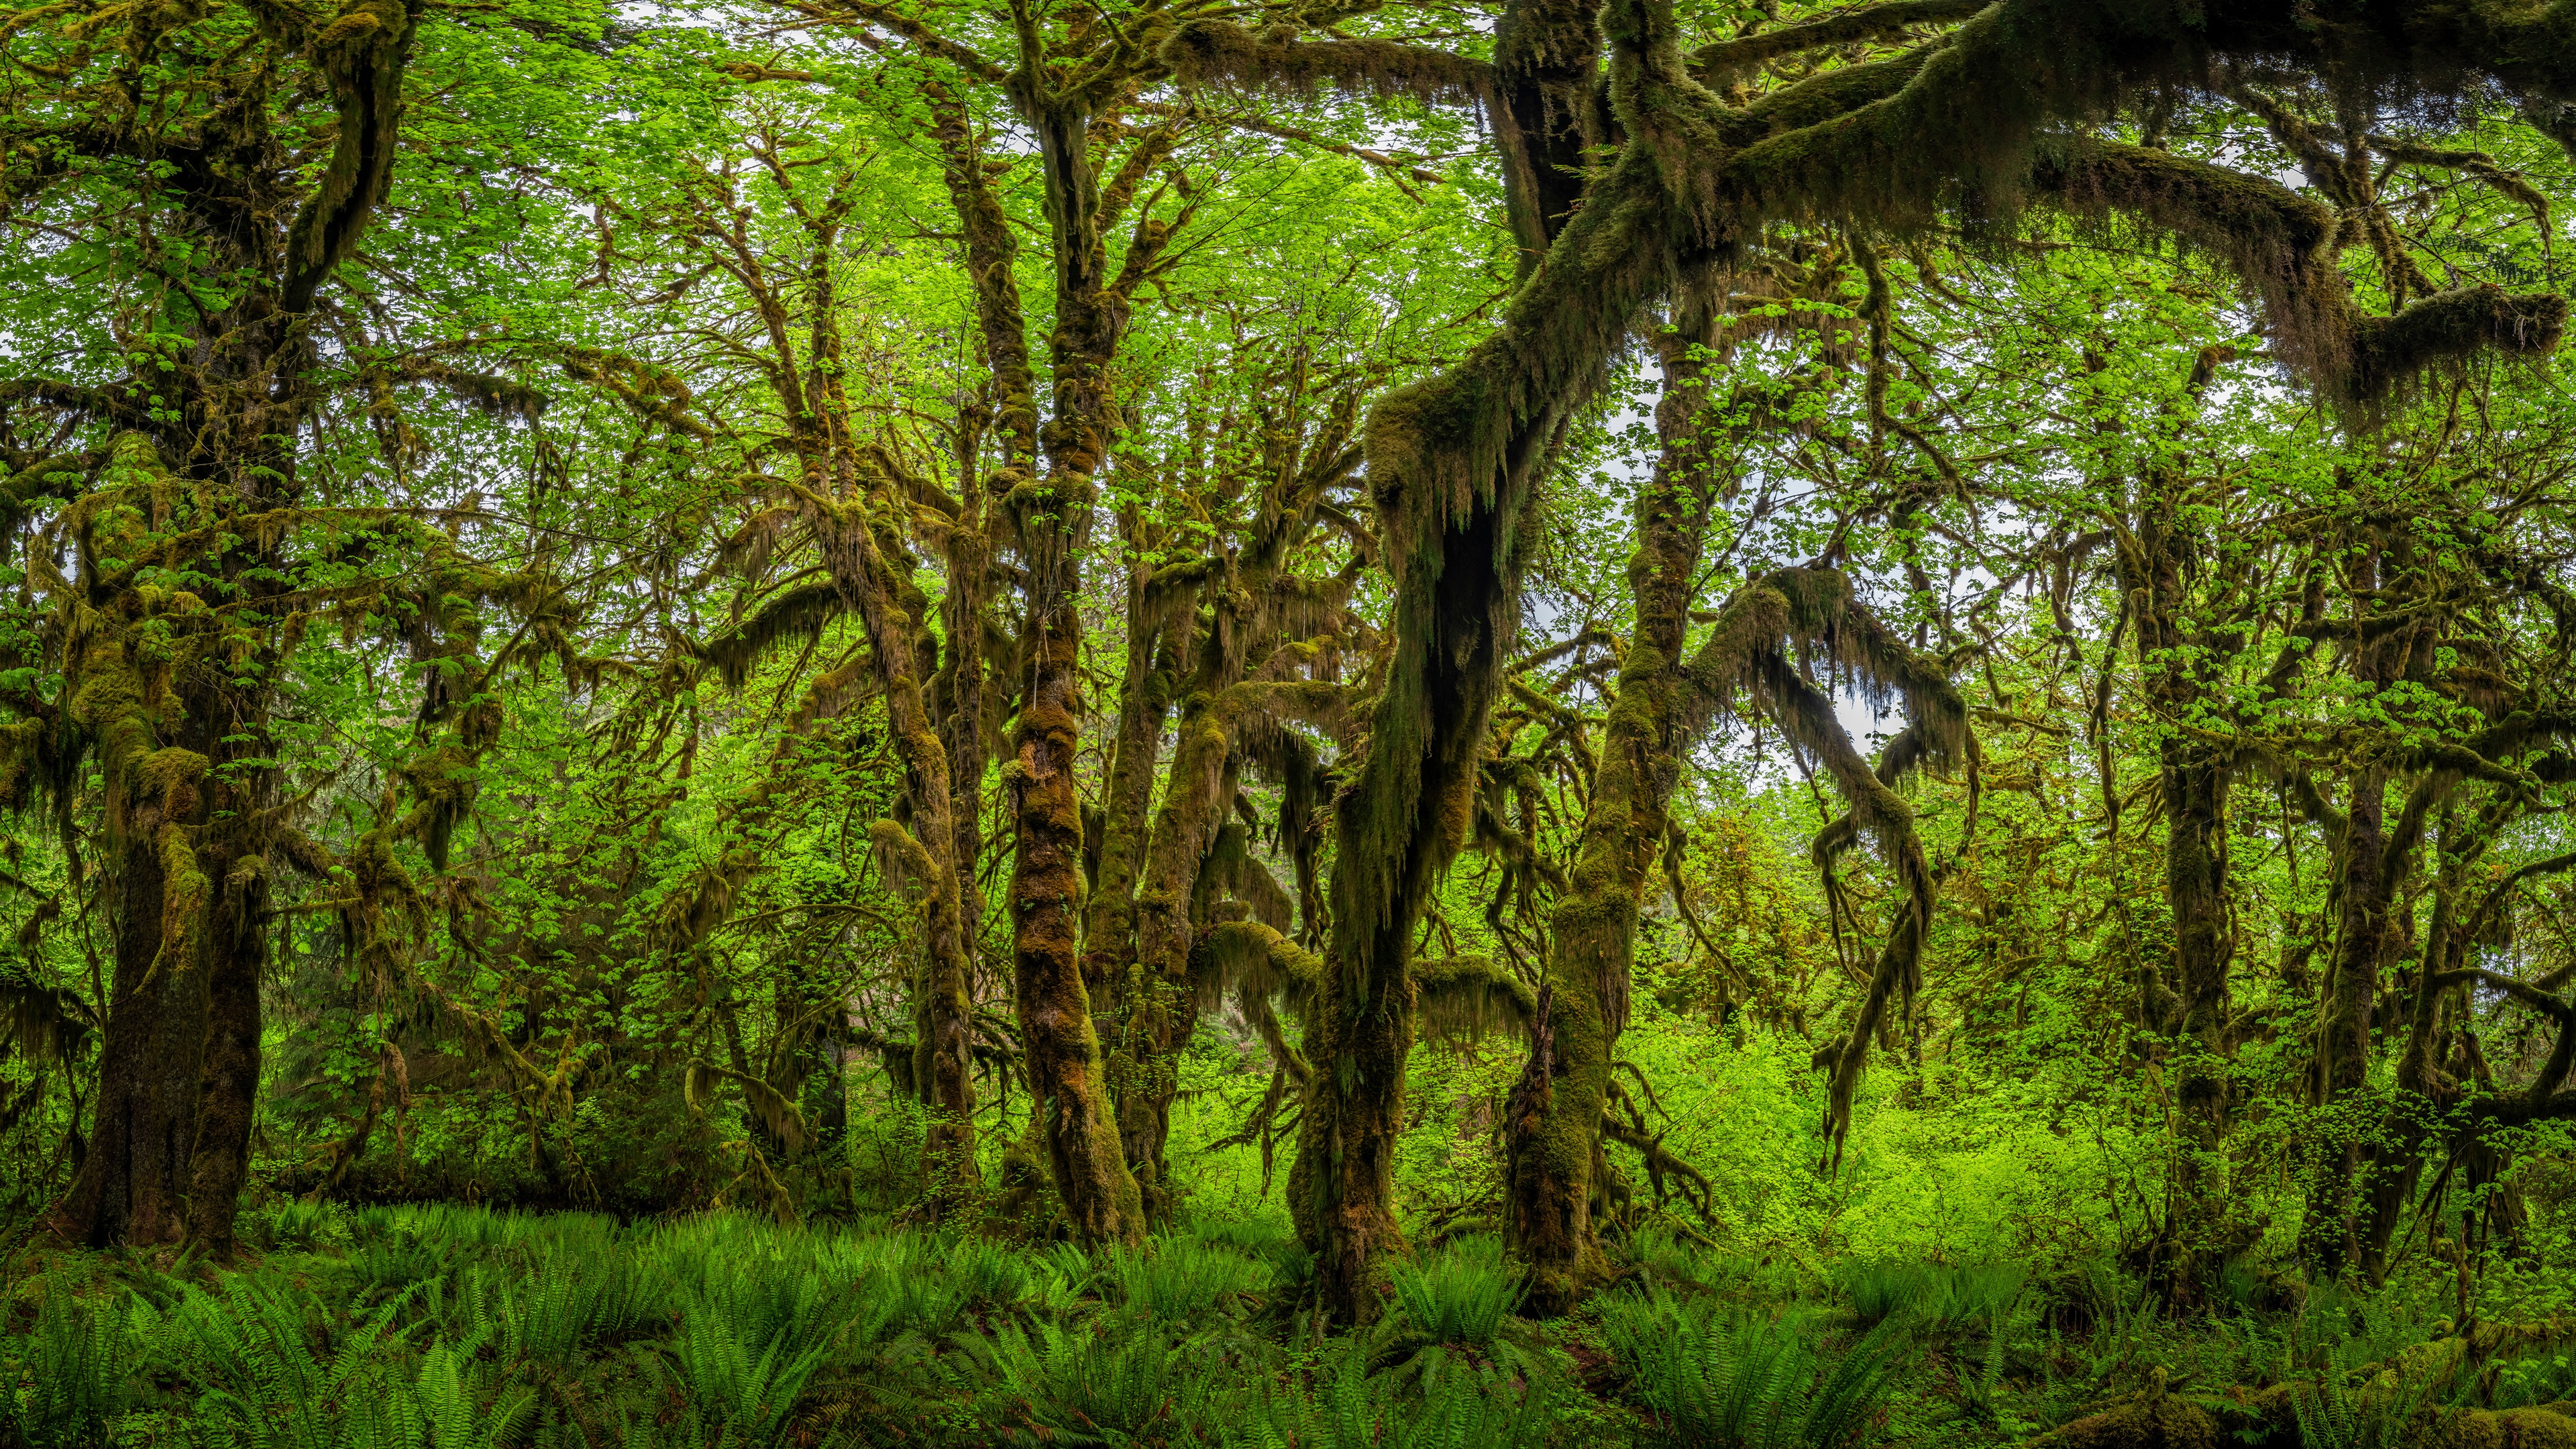 General 3840x2160 nature forest trees USA Olympic National Park Washington moss plants spring green